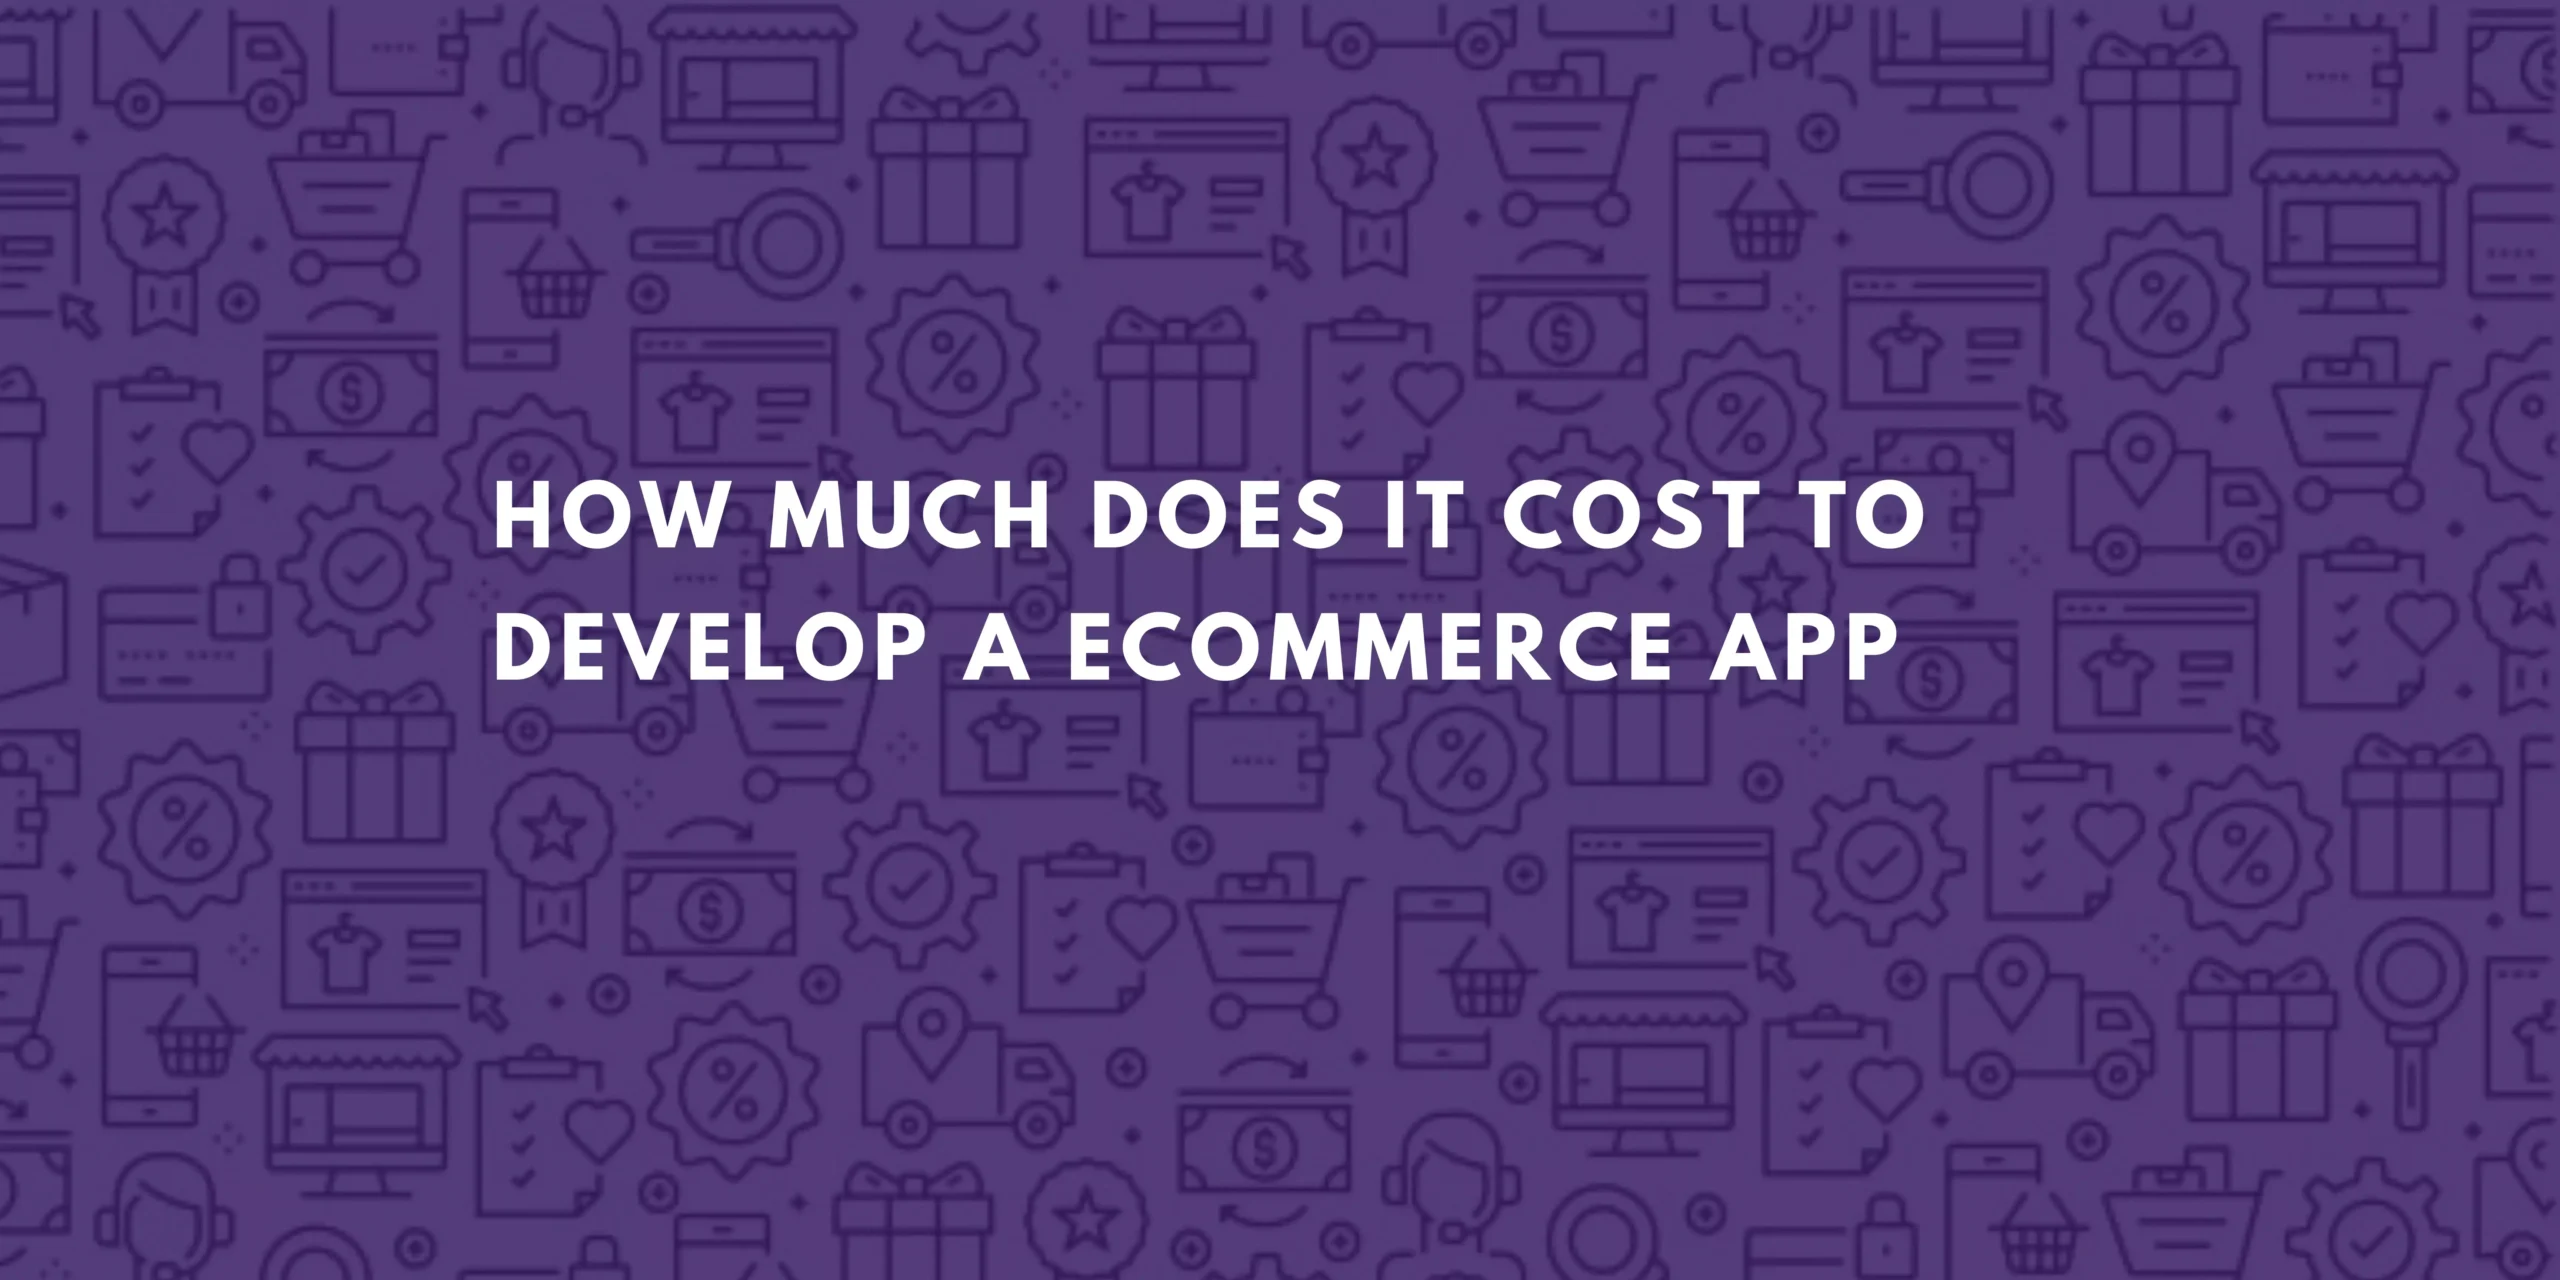 How much does it cost to develop a ecommerce app